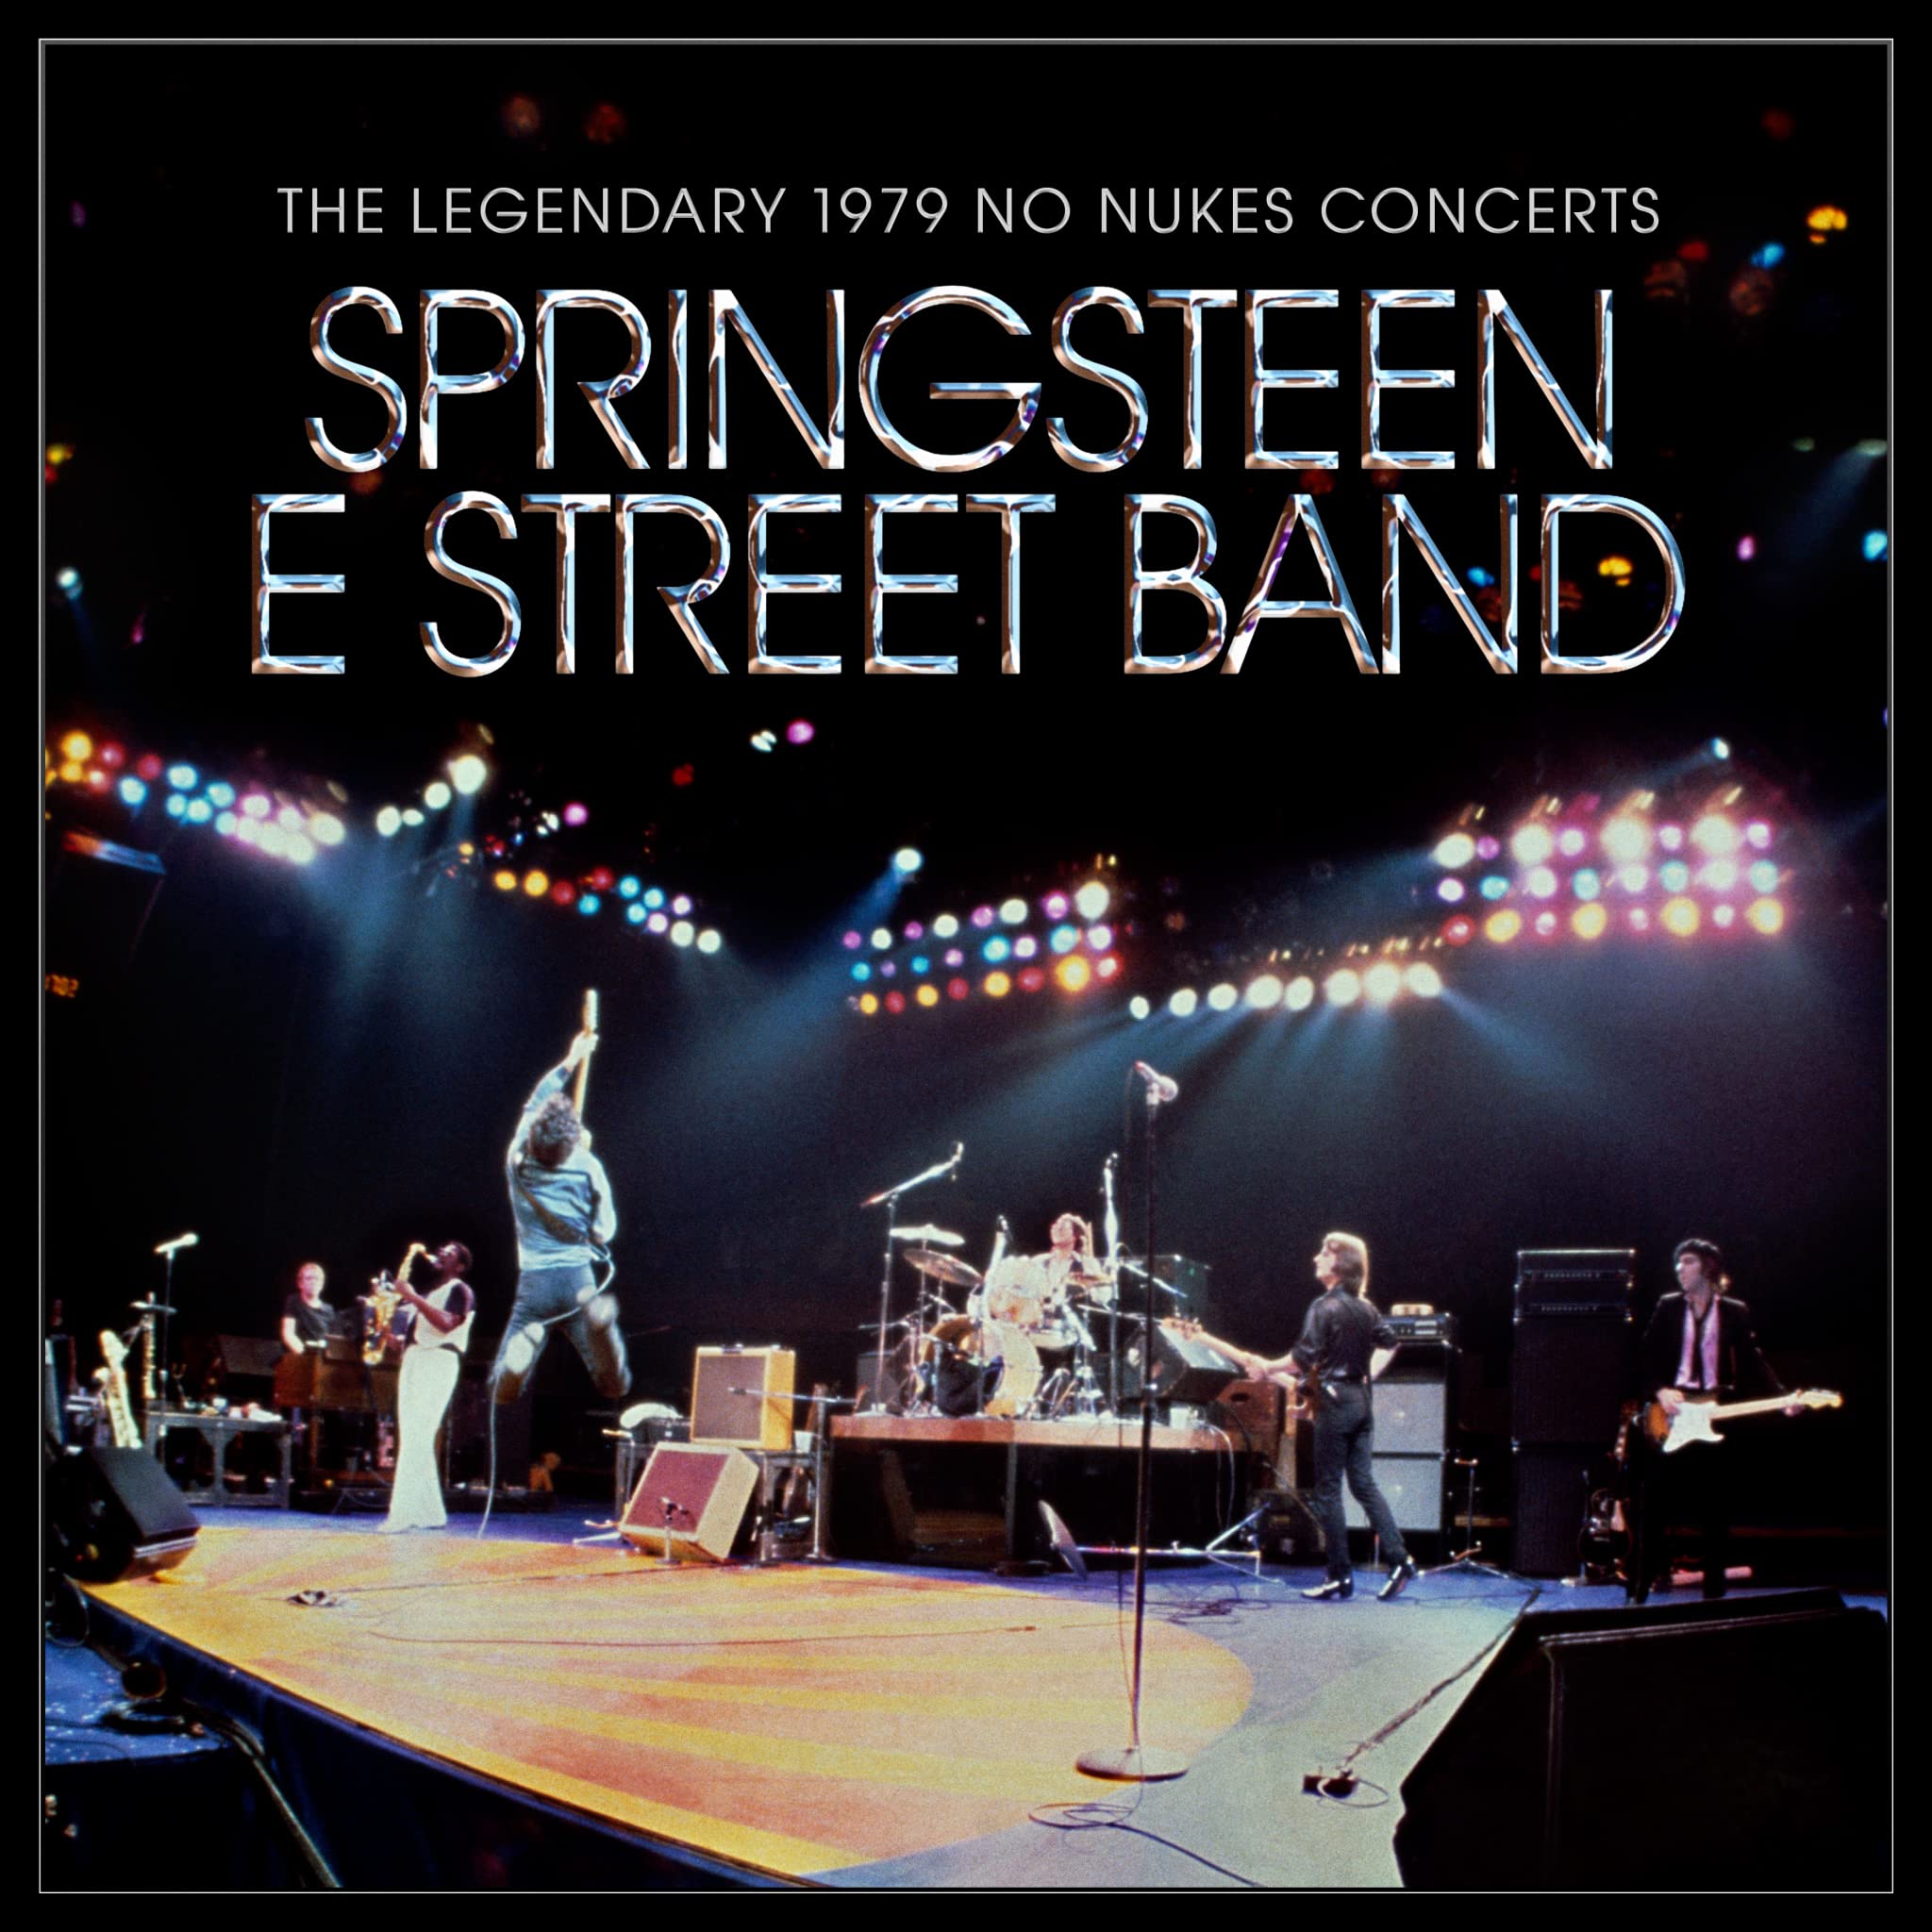 Bruce Springsteen & The E Street Band - The Legendary 1979 No Nukes Concerts (2021) [FLAC] Download